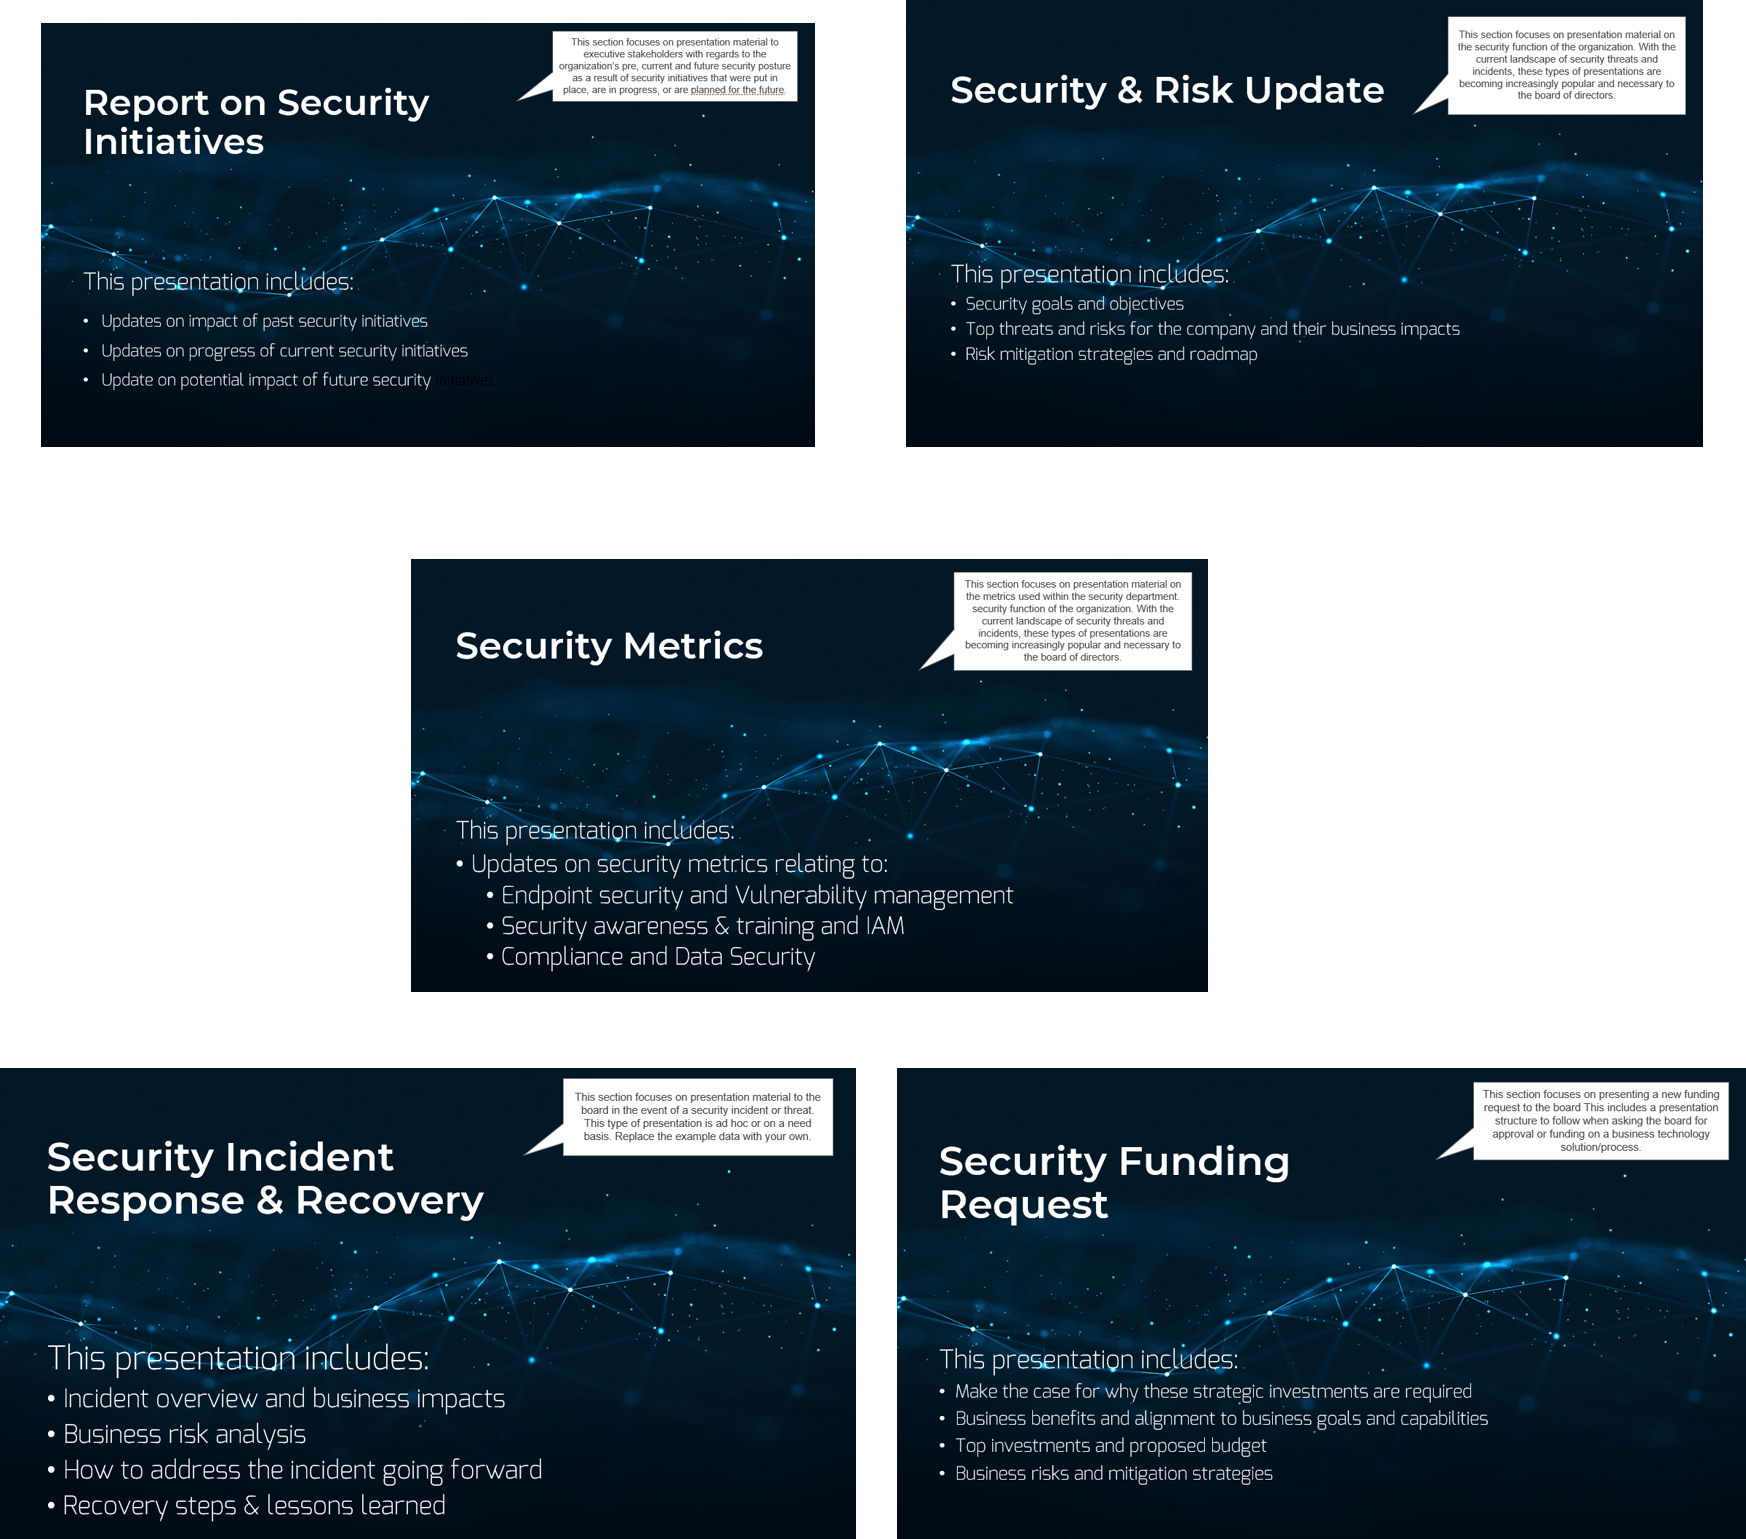 The image contains screenshots of the Security Presentation Templates.